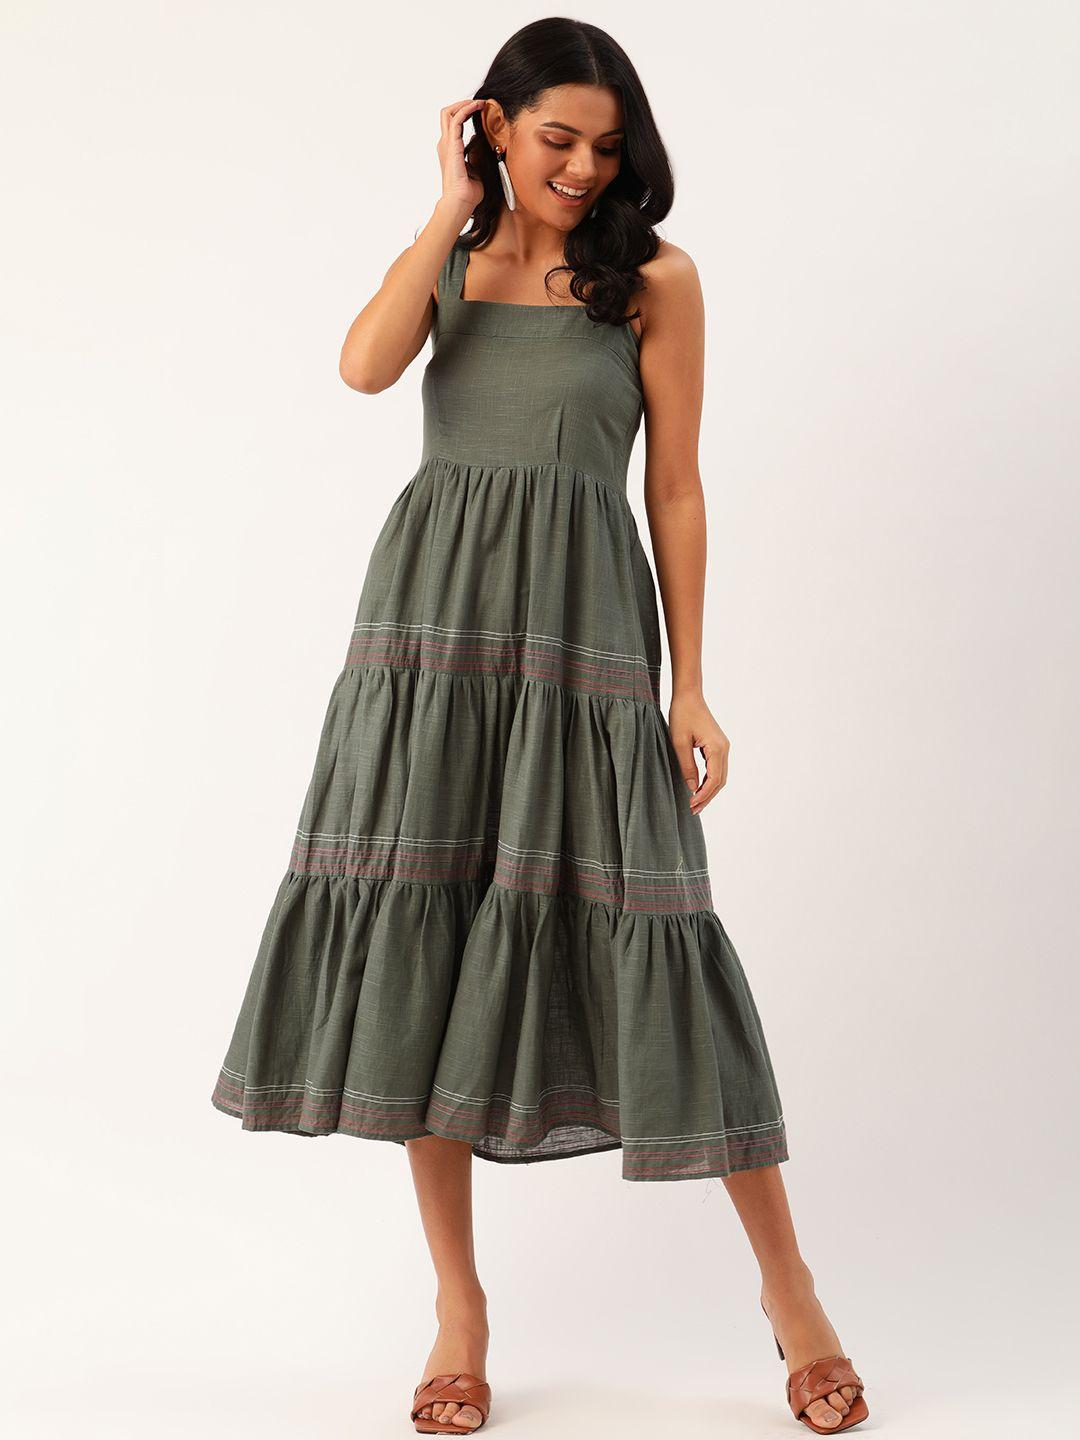 dressberry women olive green solid tiered a-line dress